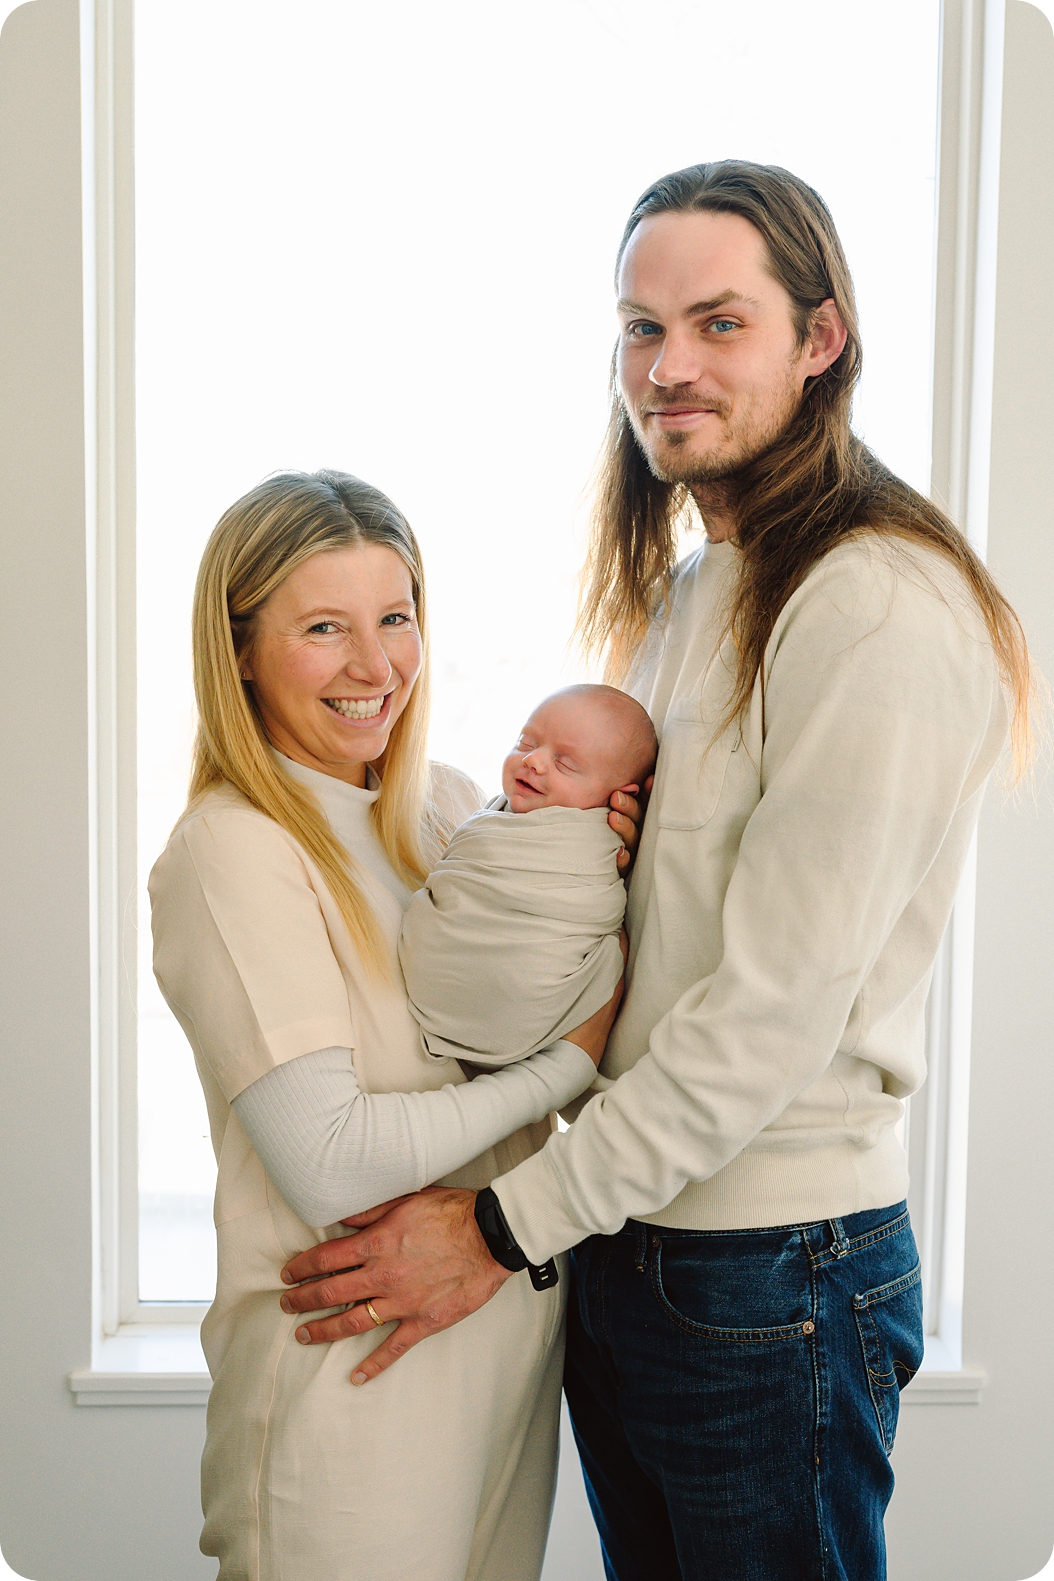 parents hold baby girl in window during Lifestyle Newborn Session in Park City